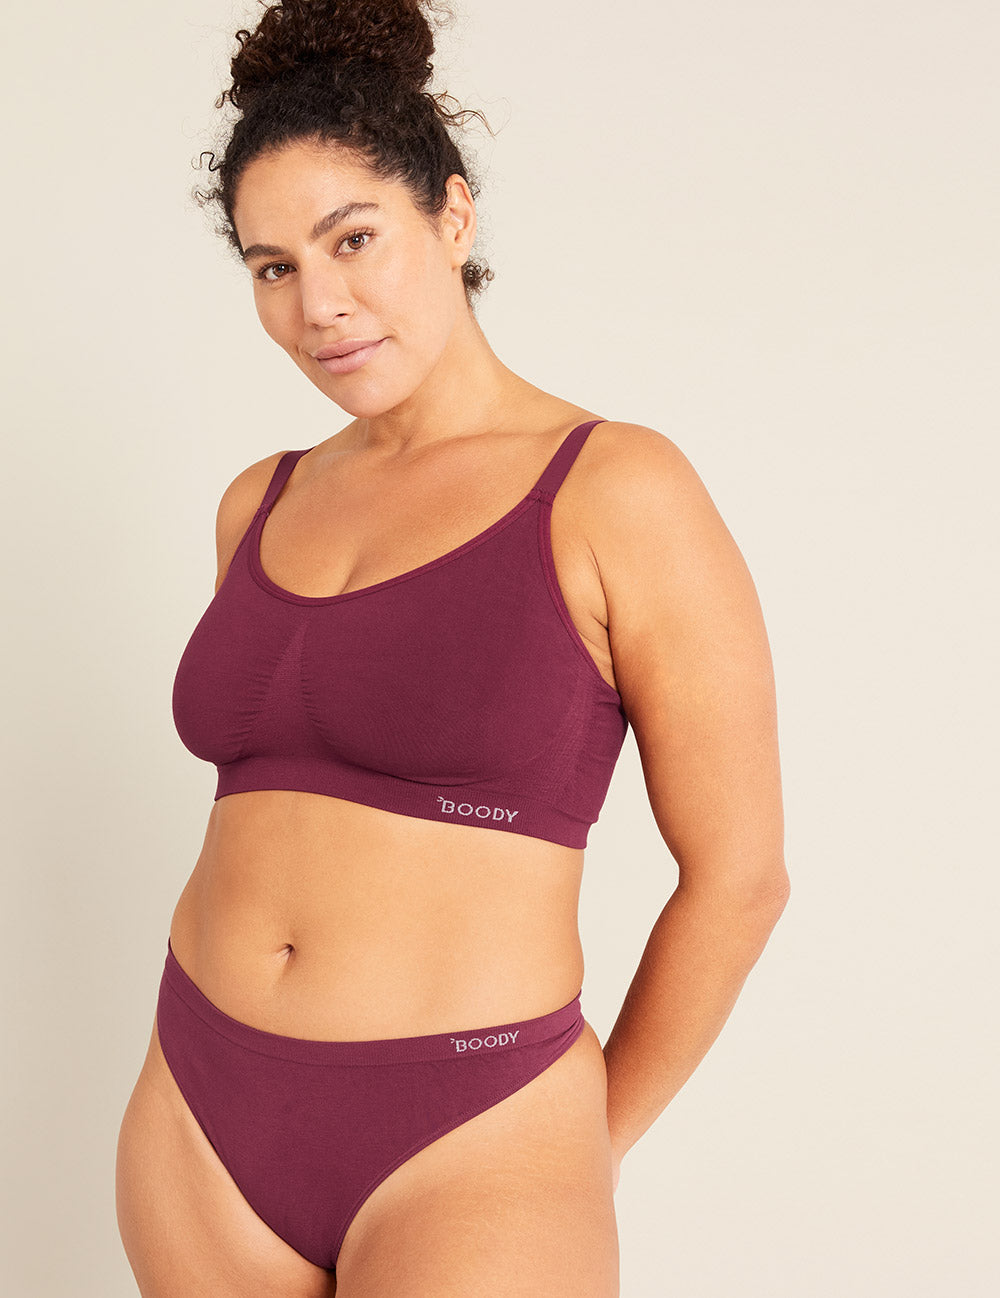 Replying to @tinyhomesteadmama does the BOODY FULL BUST bralette